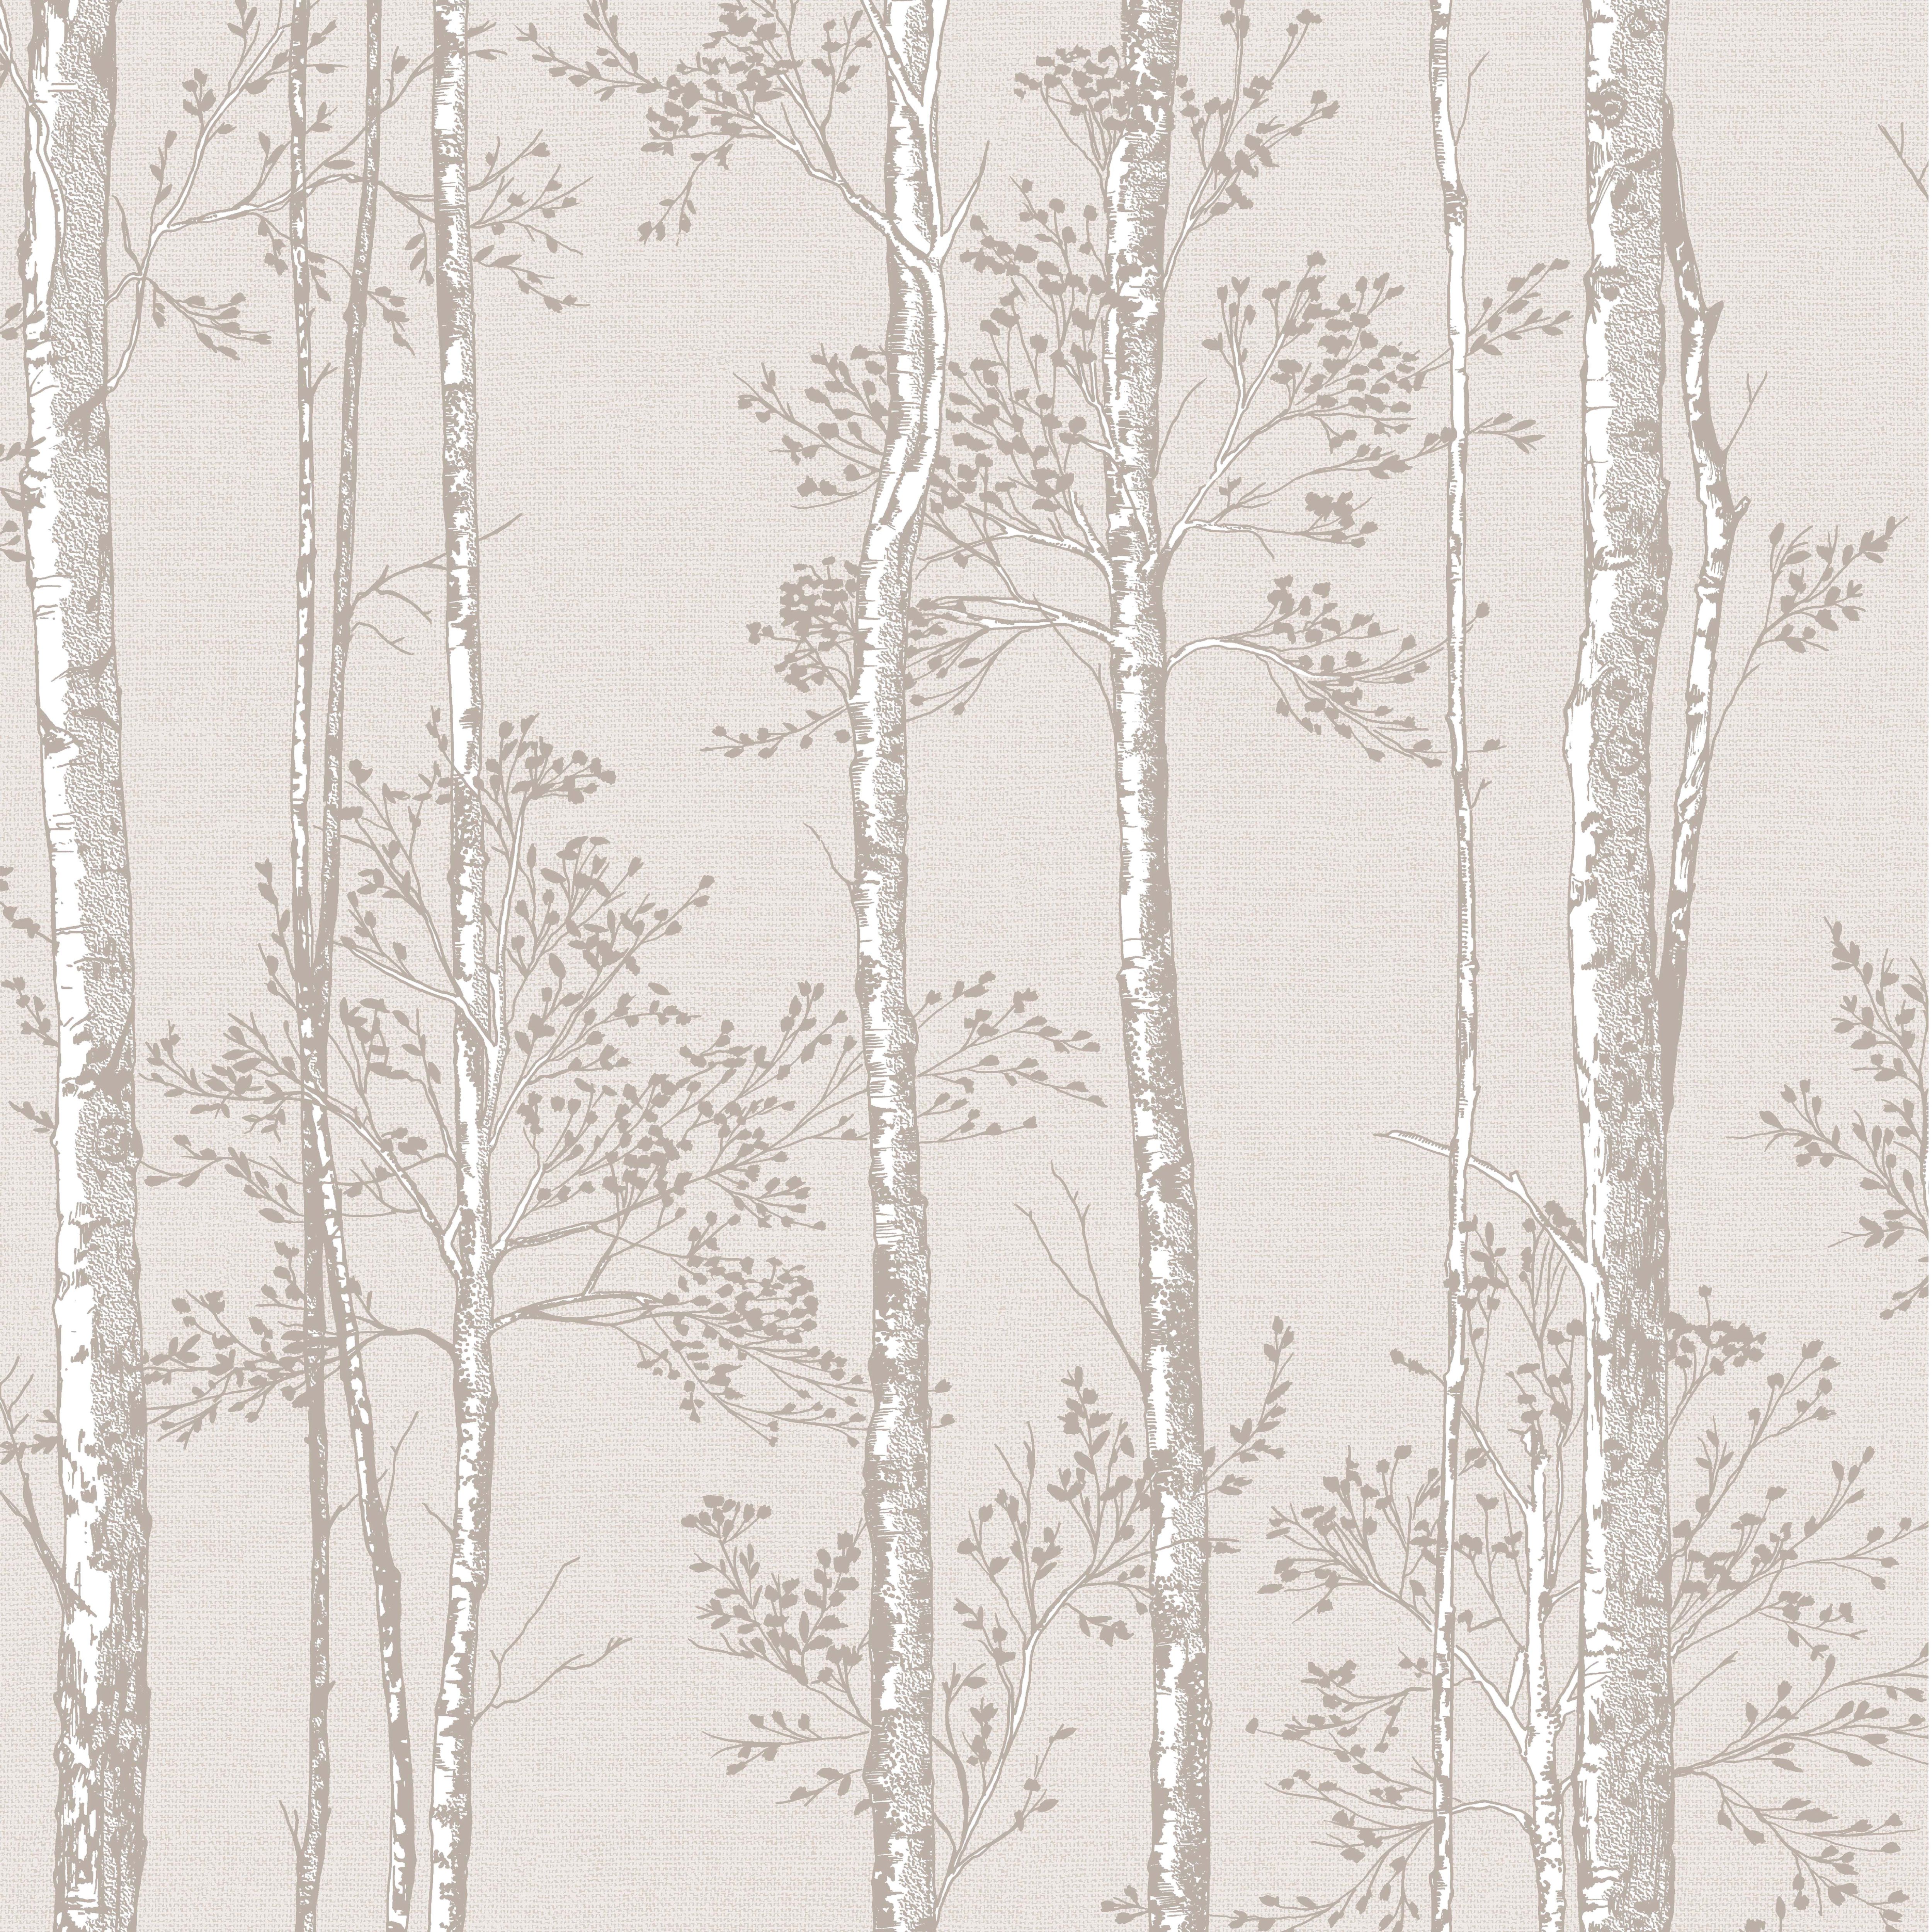 Superfresco Easy Natural Branches Wallpaper - 10m